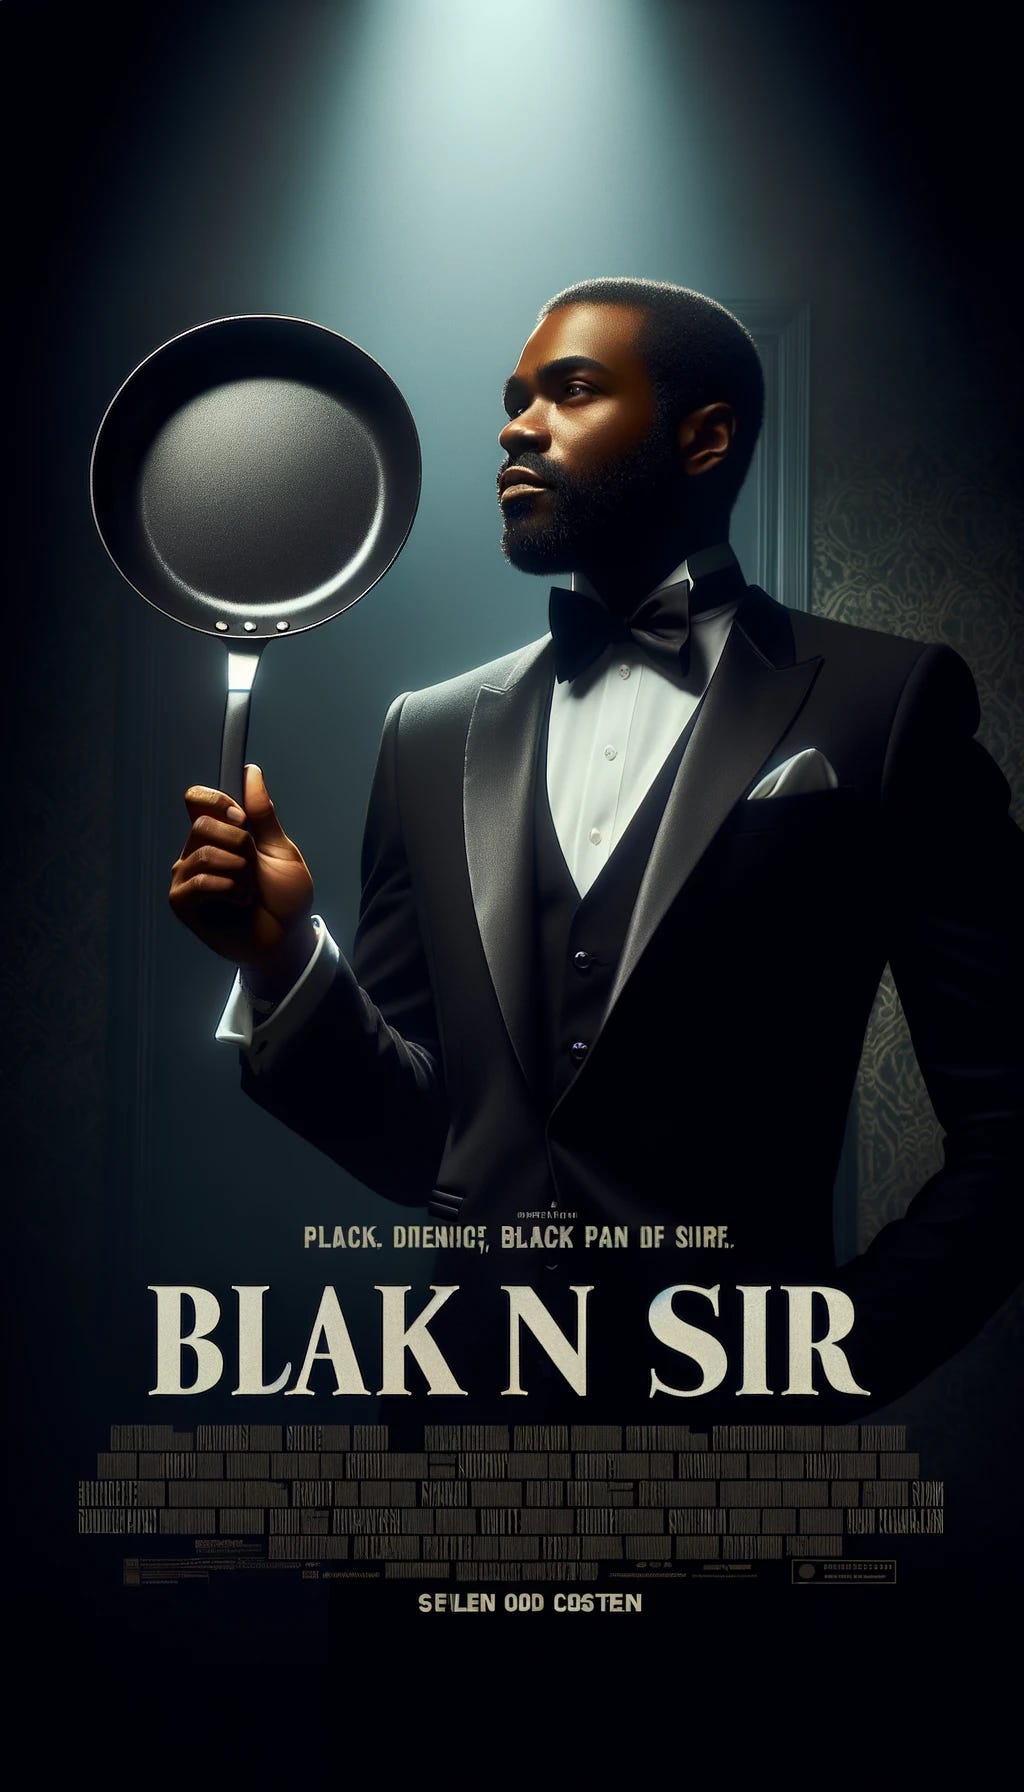 The "Black Pan Sir" poster that's completely misspelled